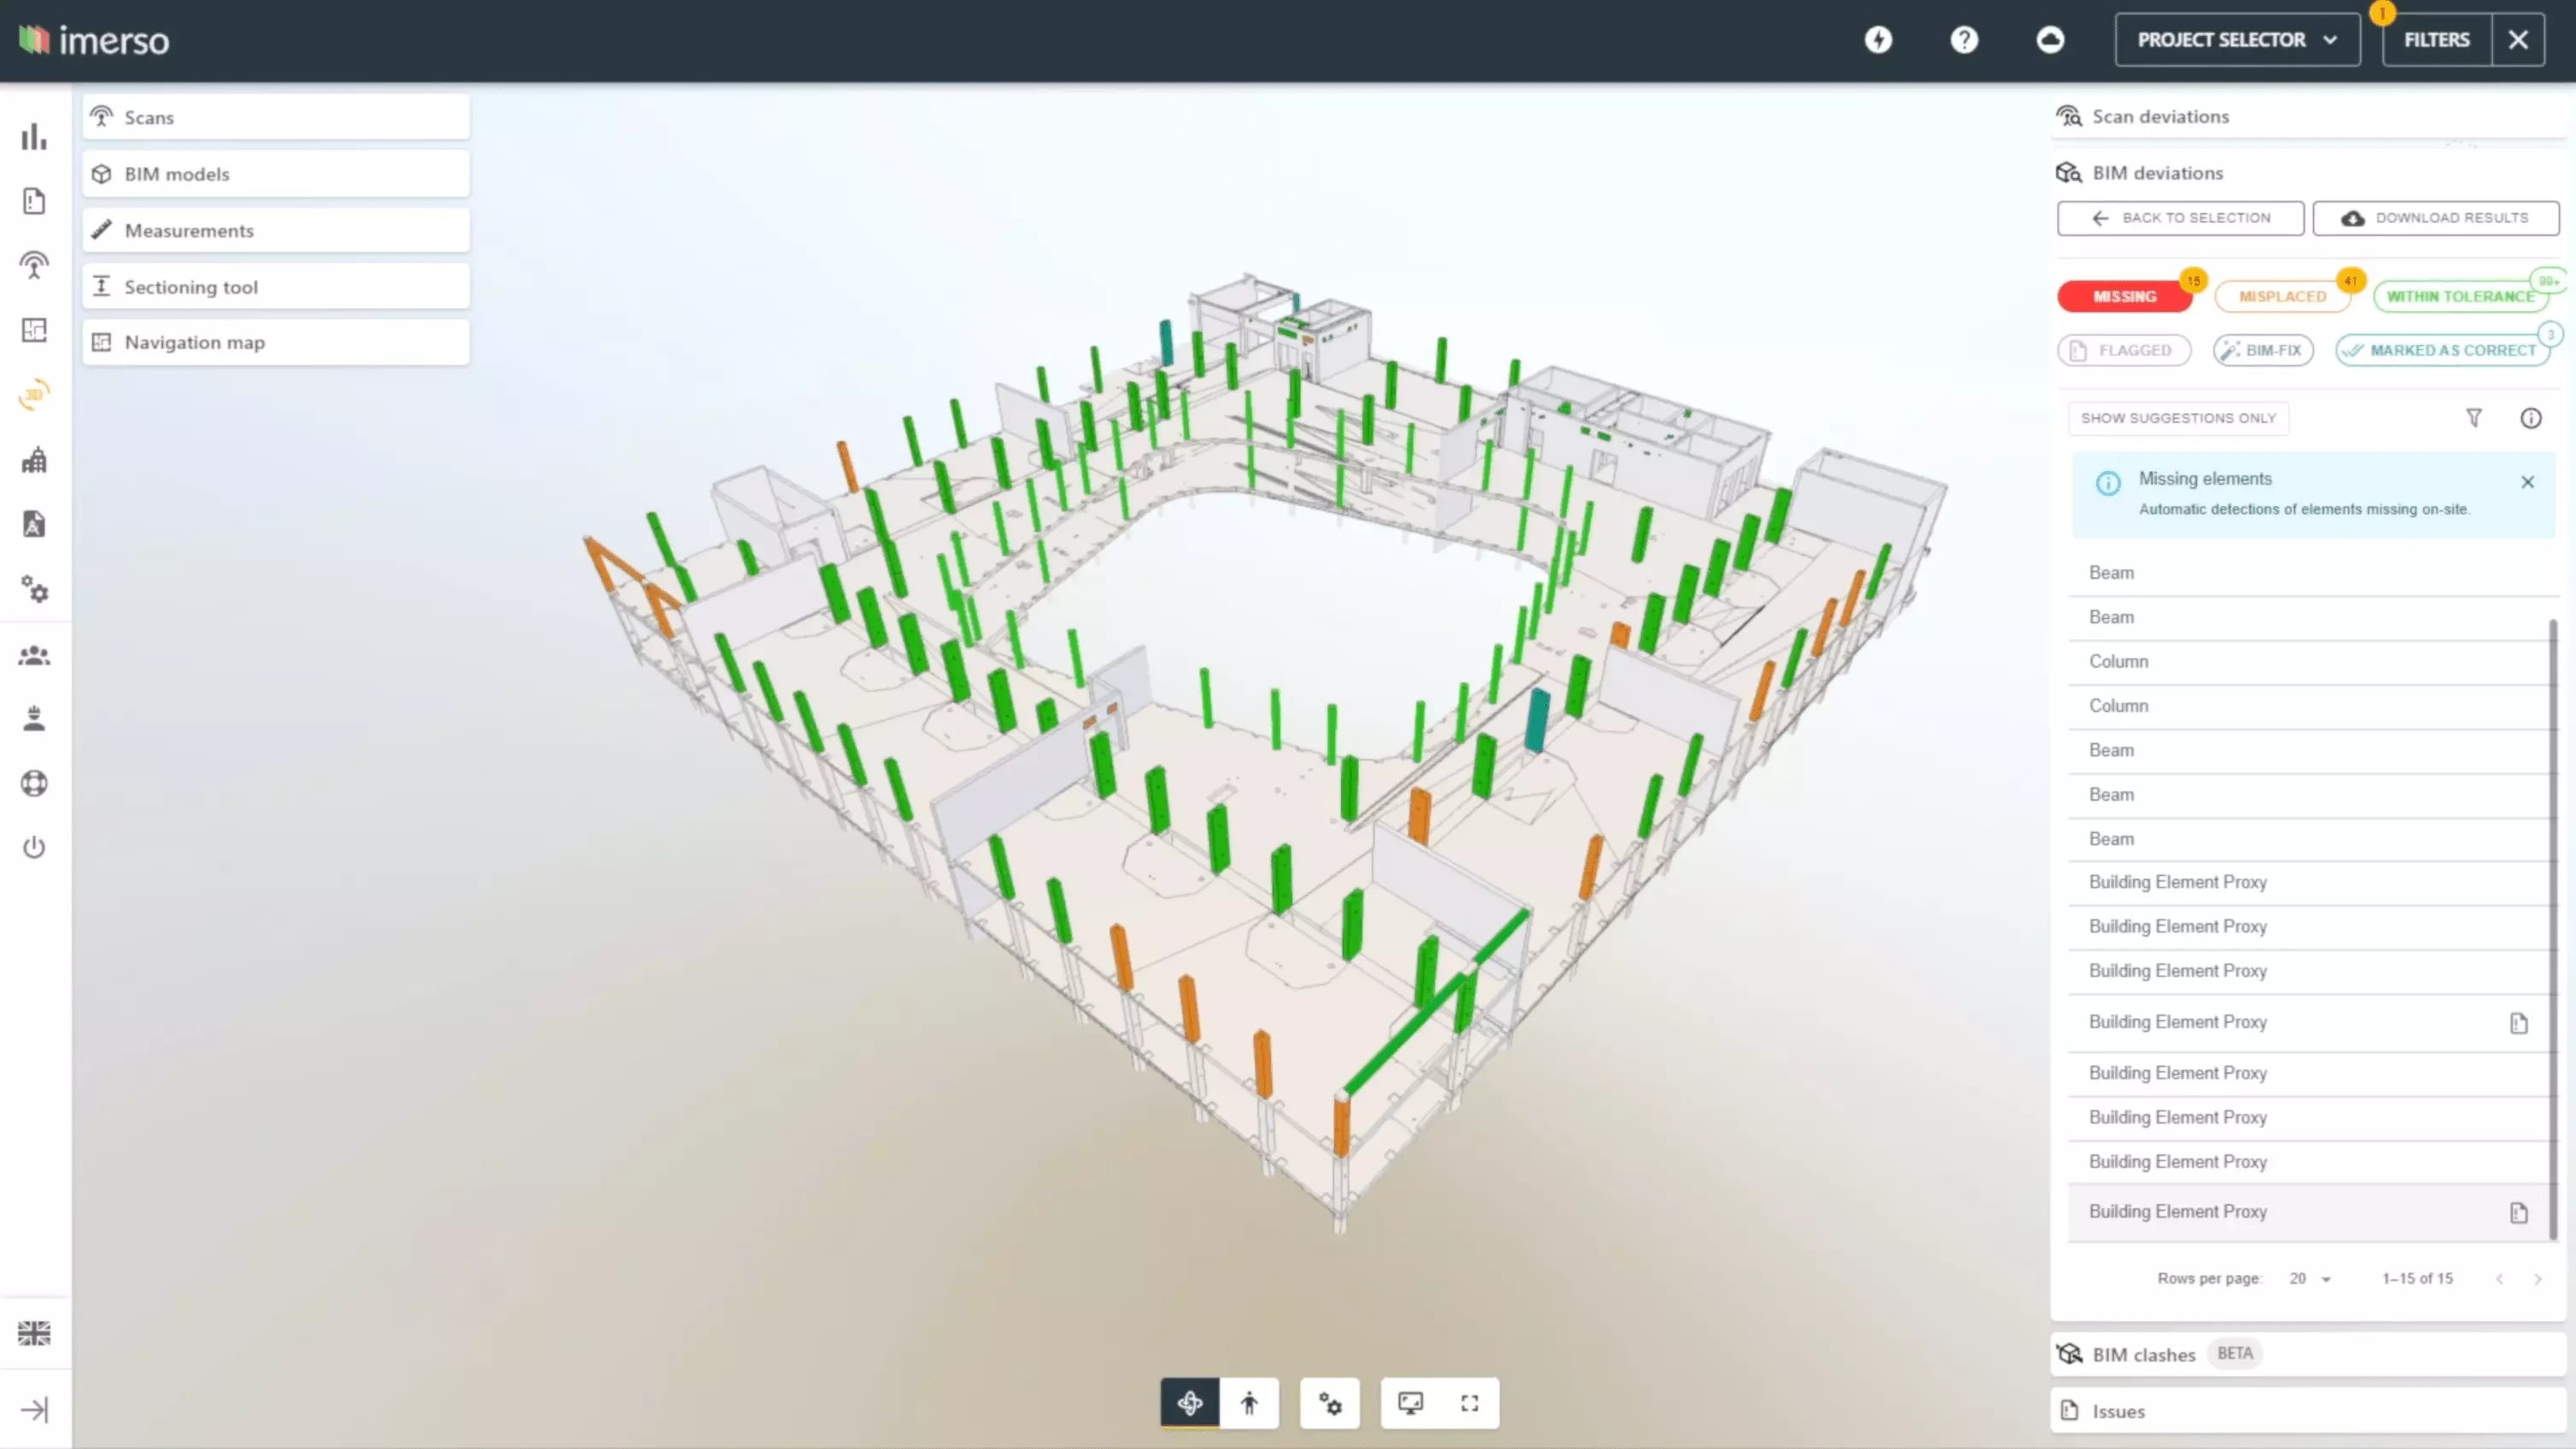 Imerso product video showcasing its capabilities: upload of BIM files, 3D scan of a construction site, inspection mode, surface analysis, etc